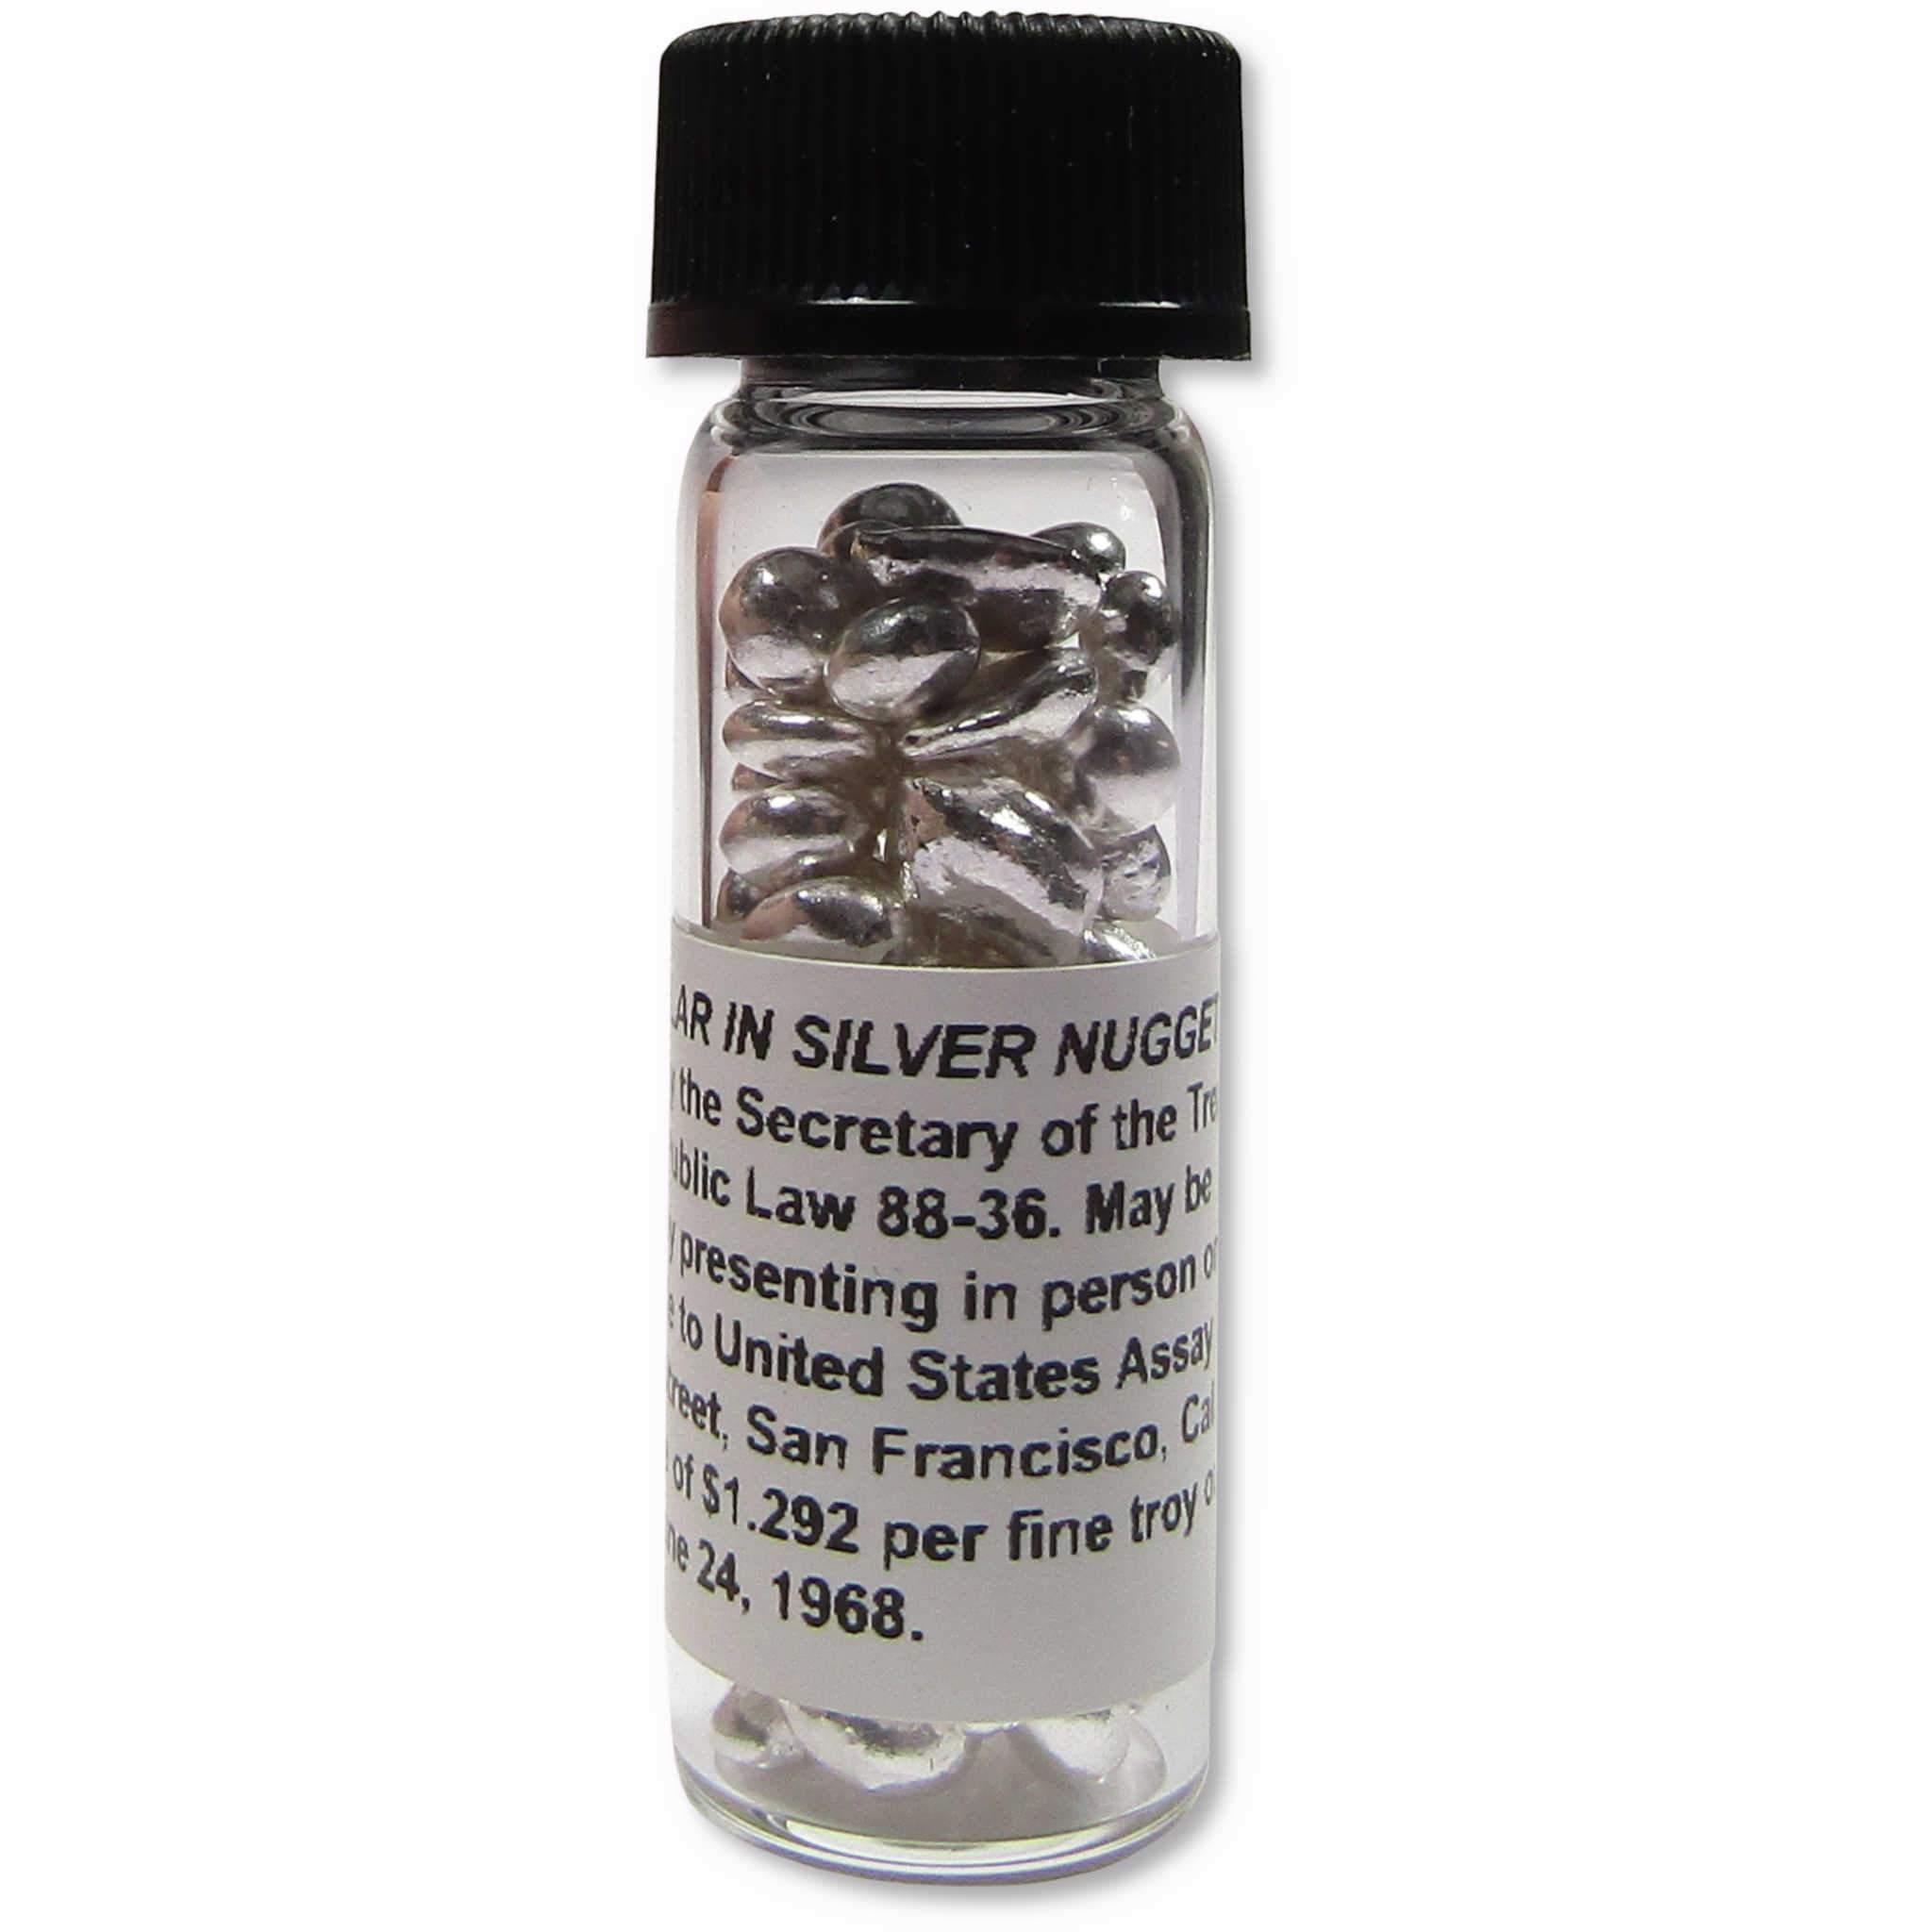 One Dollar in Silver Shot Nuggets .7734 oz .999 Fine Silver Collectible in Vial